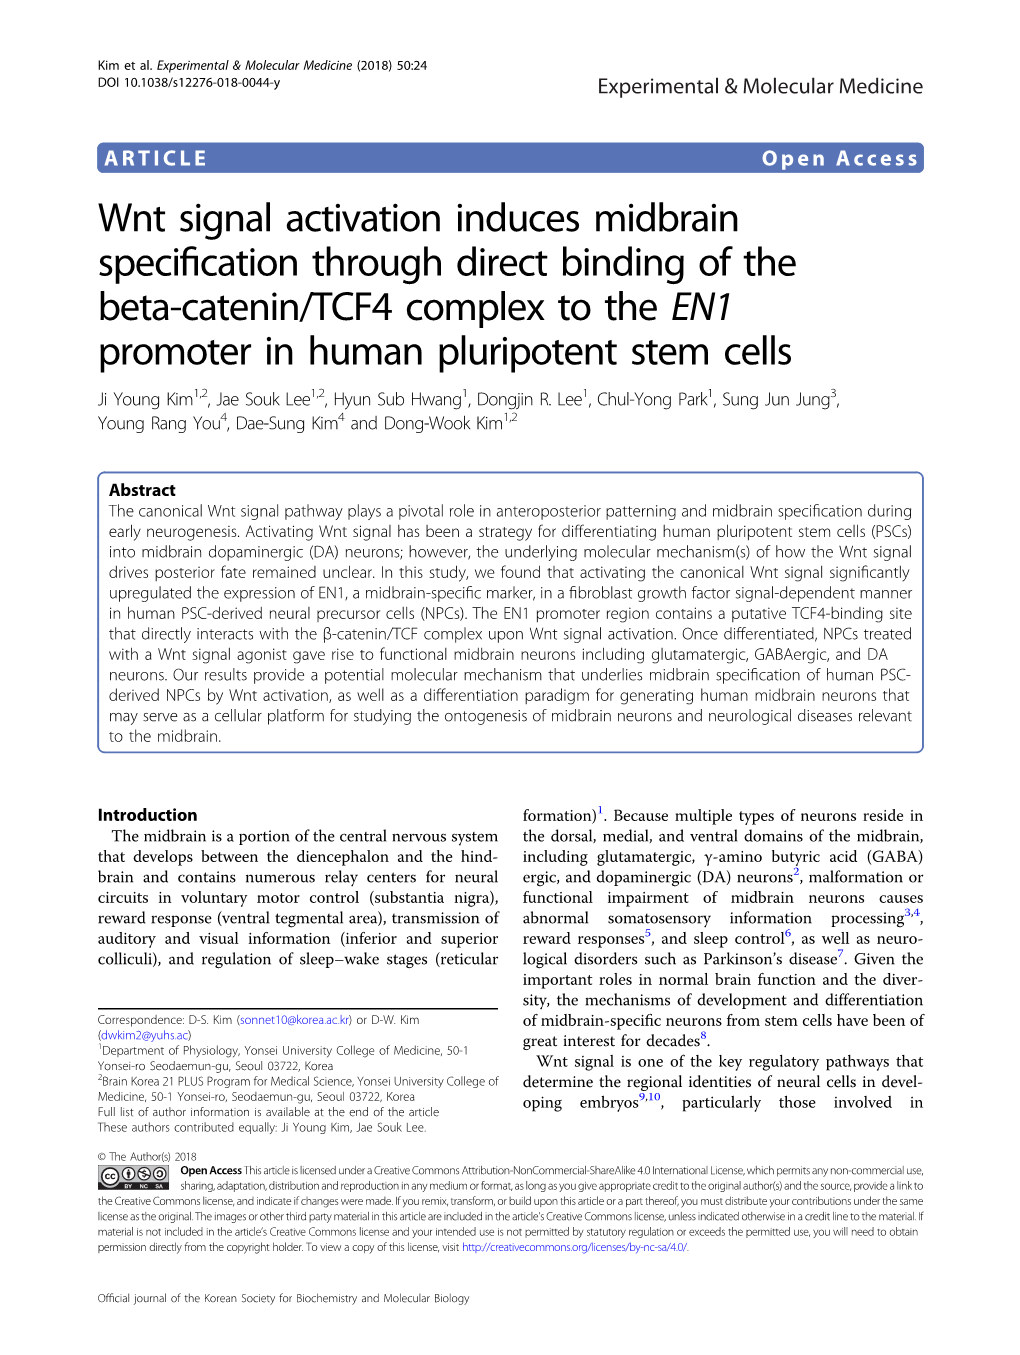 Wnt Signal Activation Induces Midbrain Specification Through Direct Binding